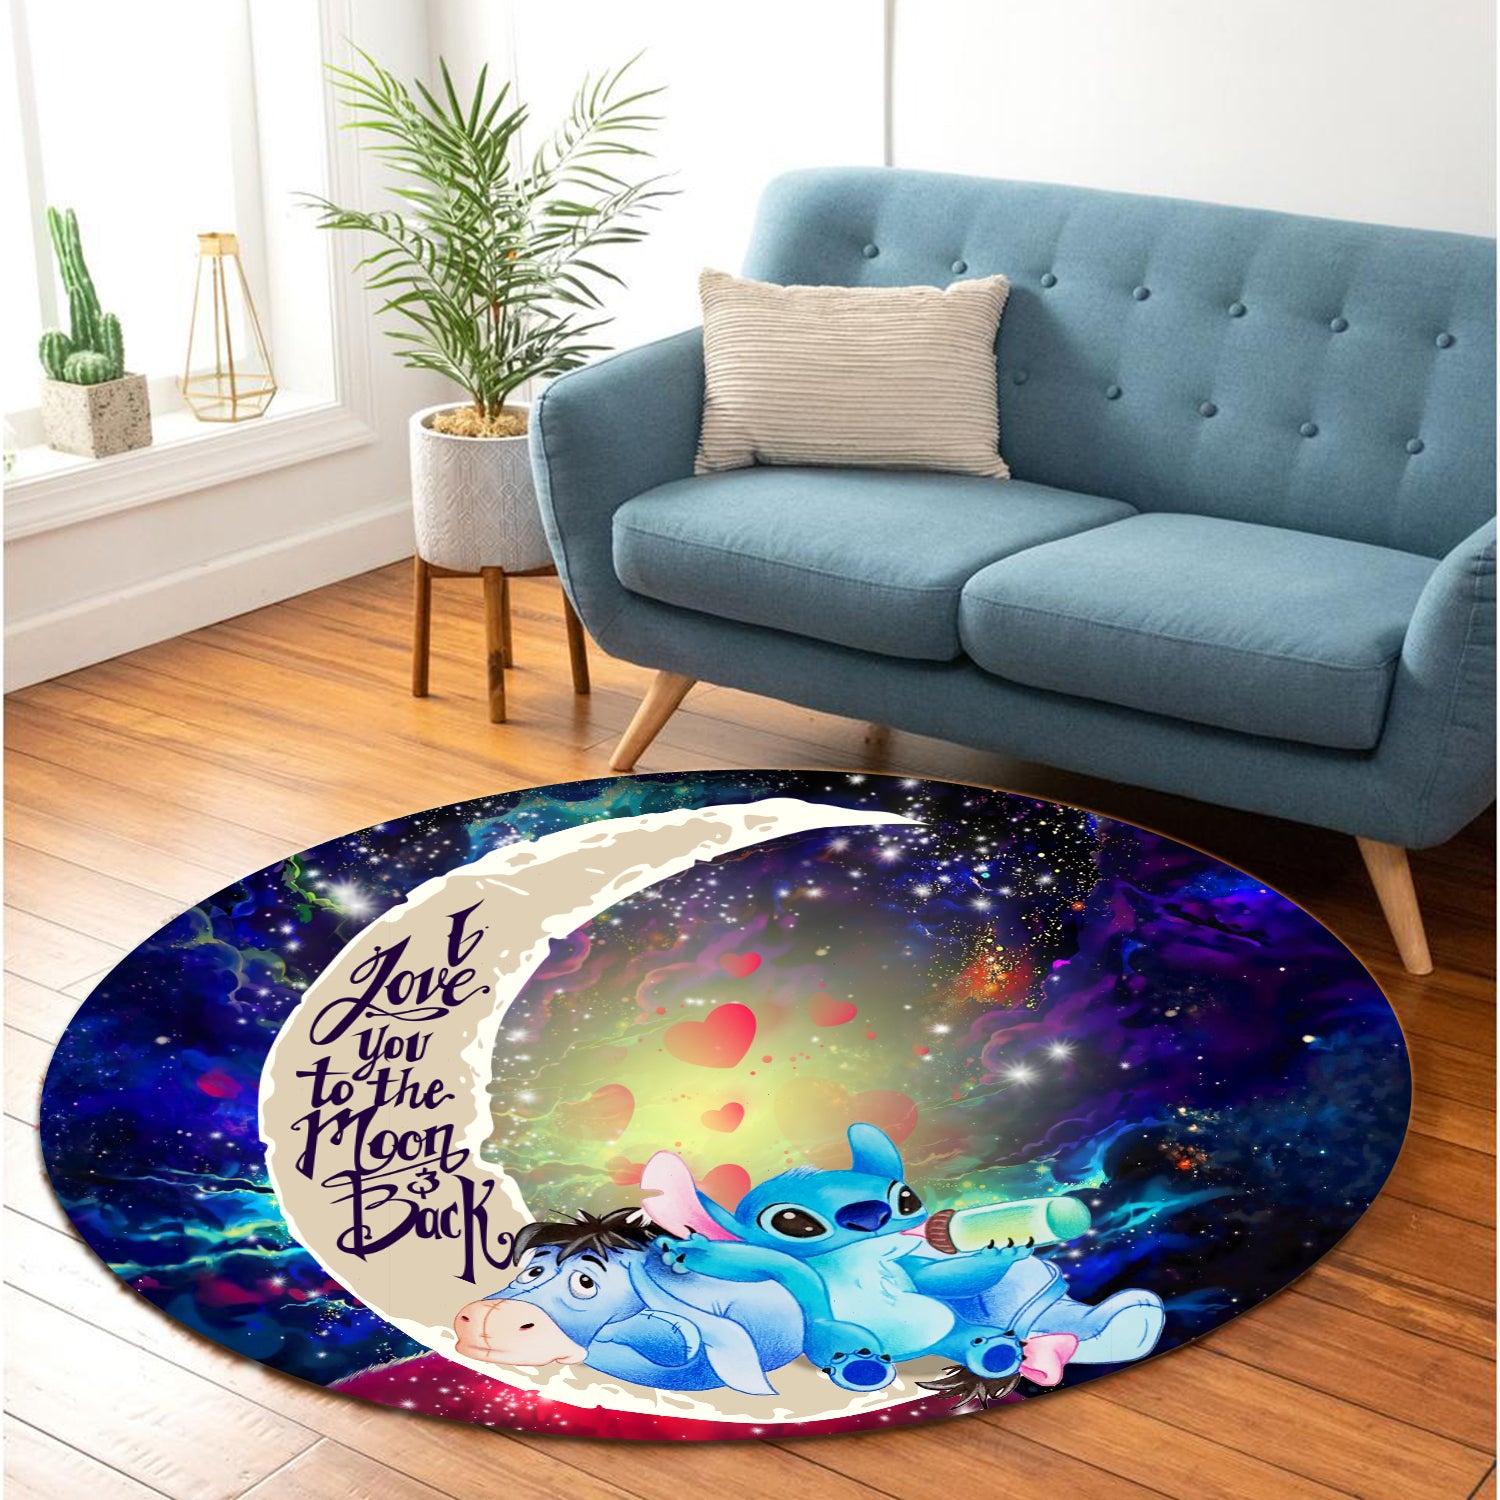 Stitch And Eeyore Couple Love You To The Moon Galaxy Round Carpet Rug Bedroom Livingroom Home Decor Nearkii